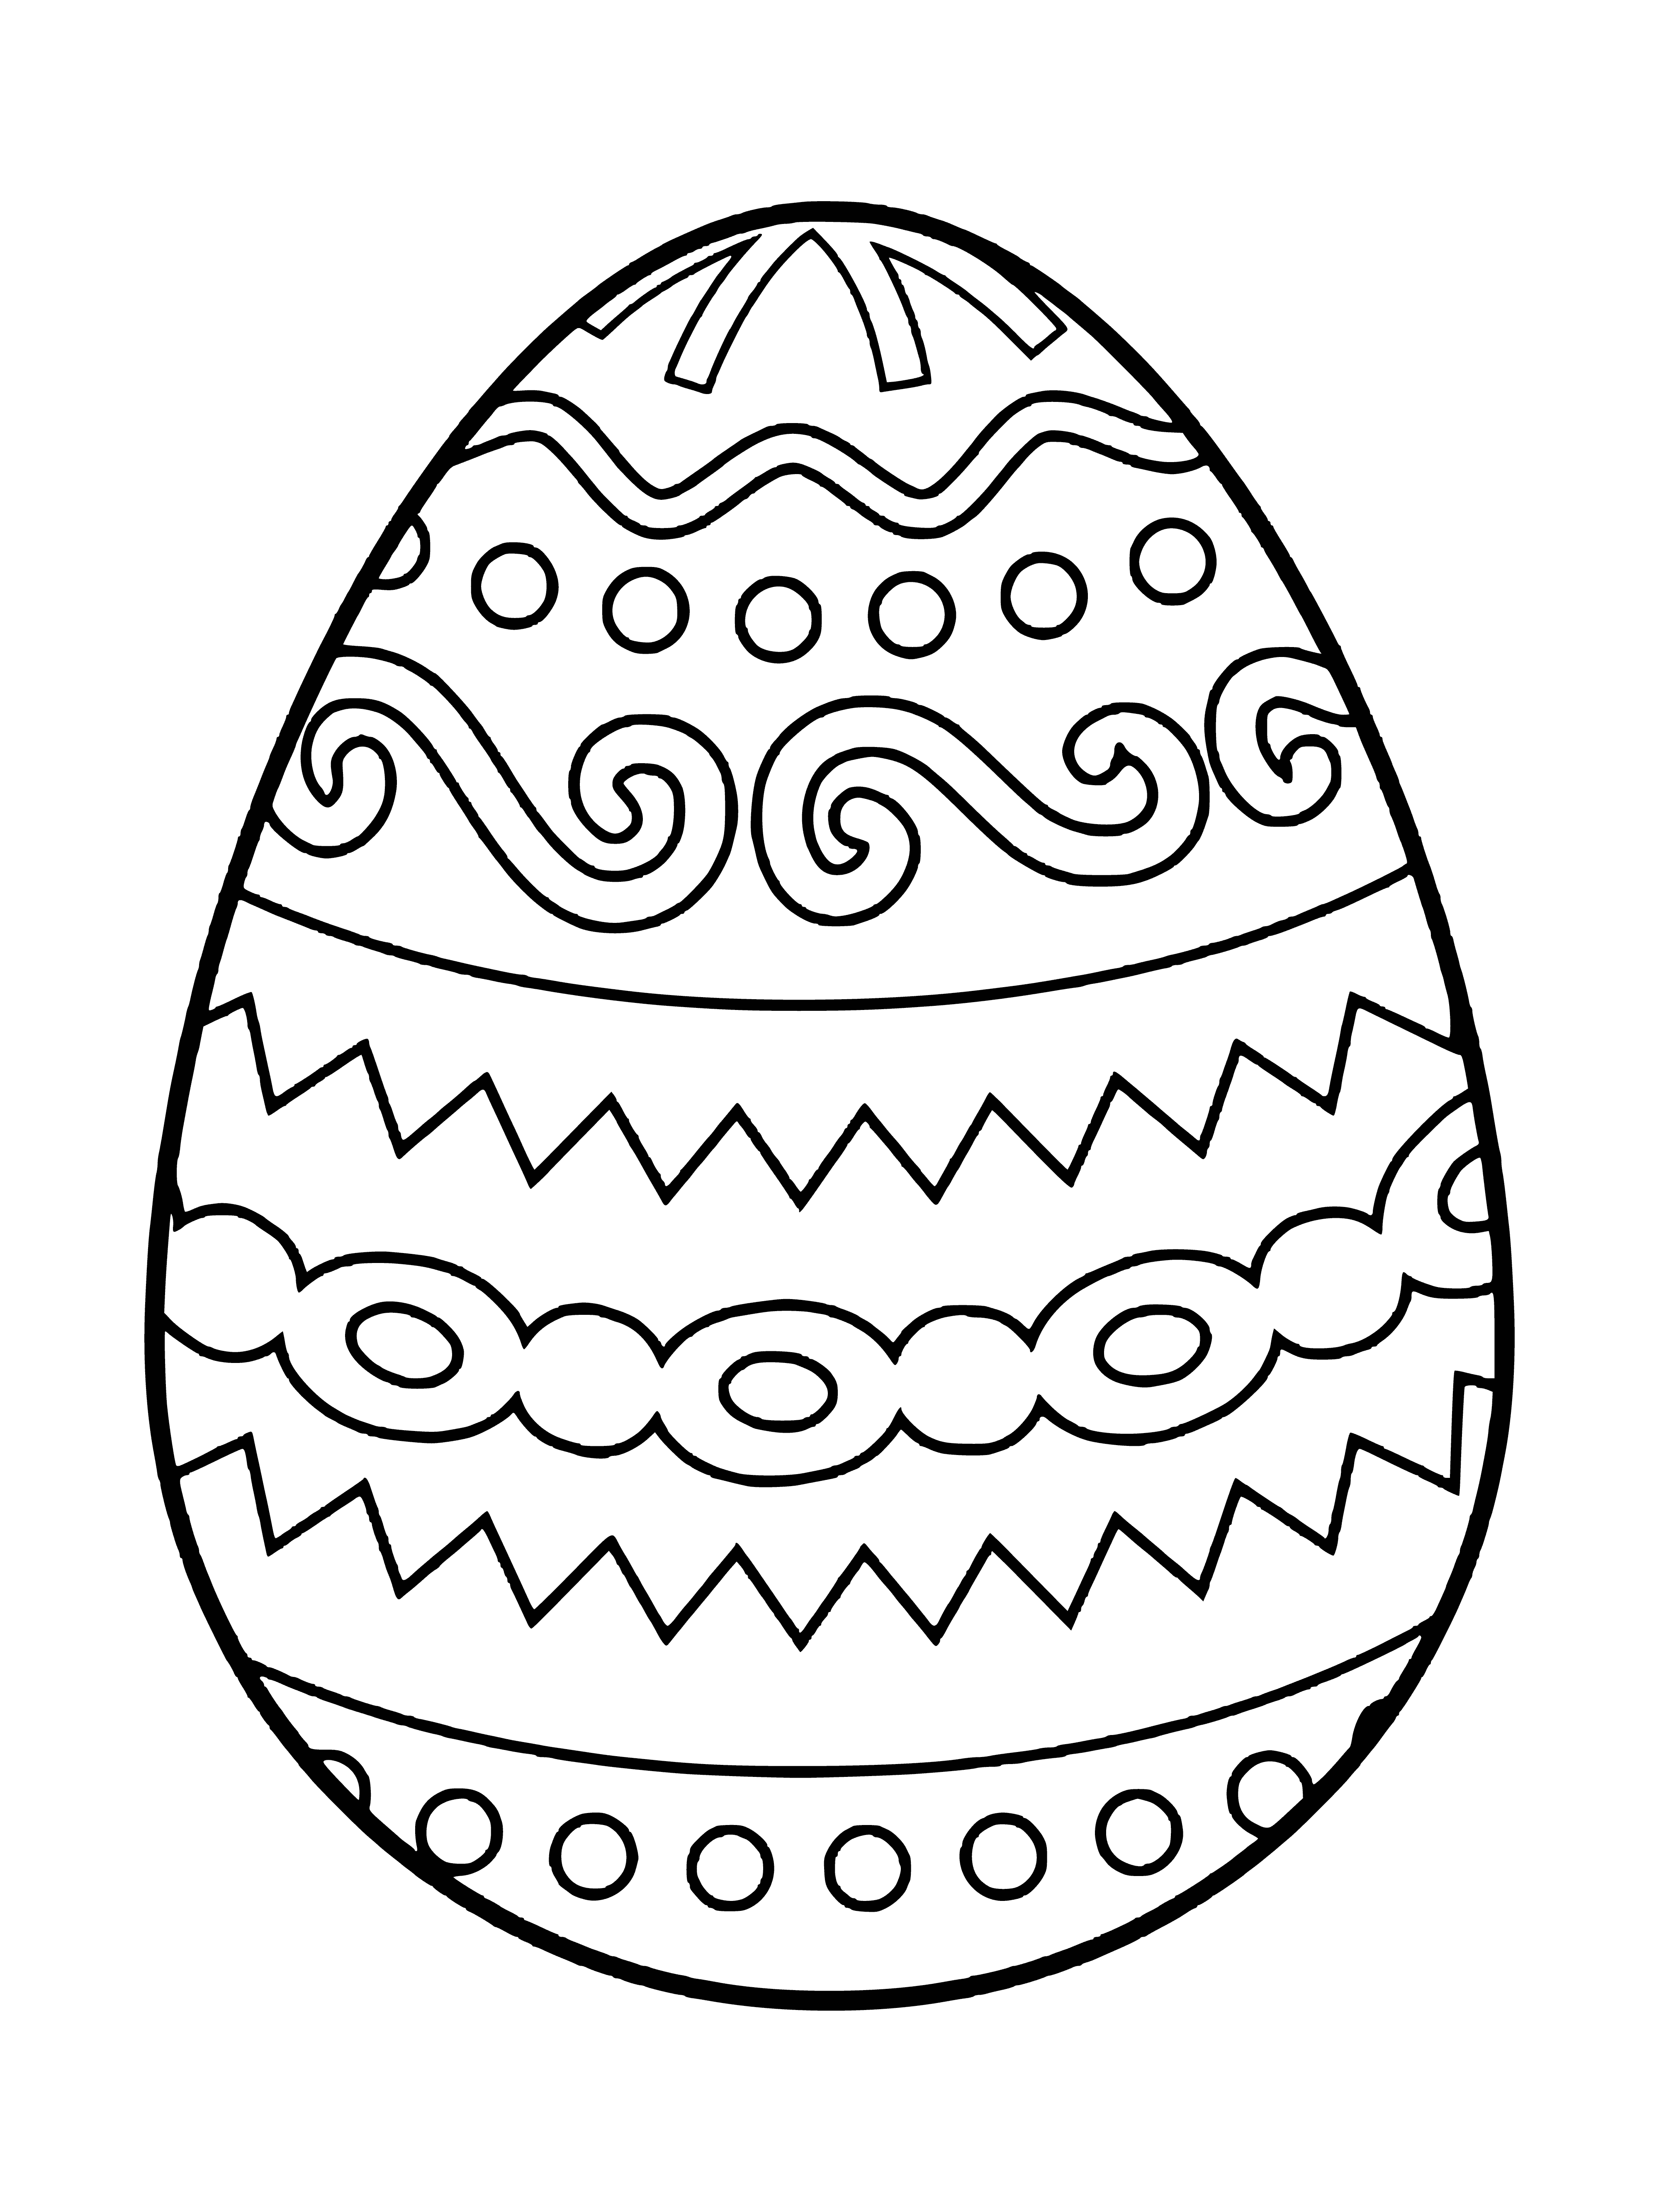 coloring page: Number Four - 
The fourth Easter egg has a purple background and is decorated with rainbow stripes. In the center is a yellow chick.

1st Egg:#White/#Blue polka dots; 2nd Egg:#Green/#Yellow-White stripes; 3rd Egg:#Pink /White flower; 4th Egg:#Purple/Rainbow stripes; All w/ a yellow chick in the center.